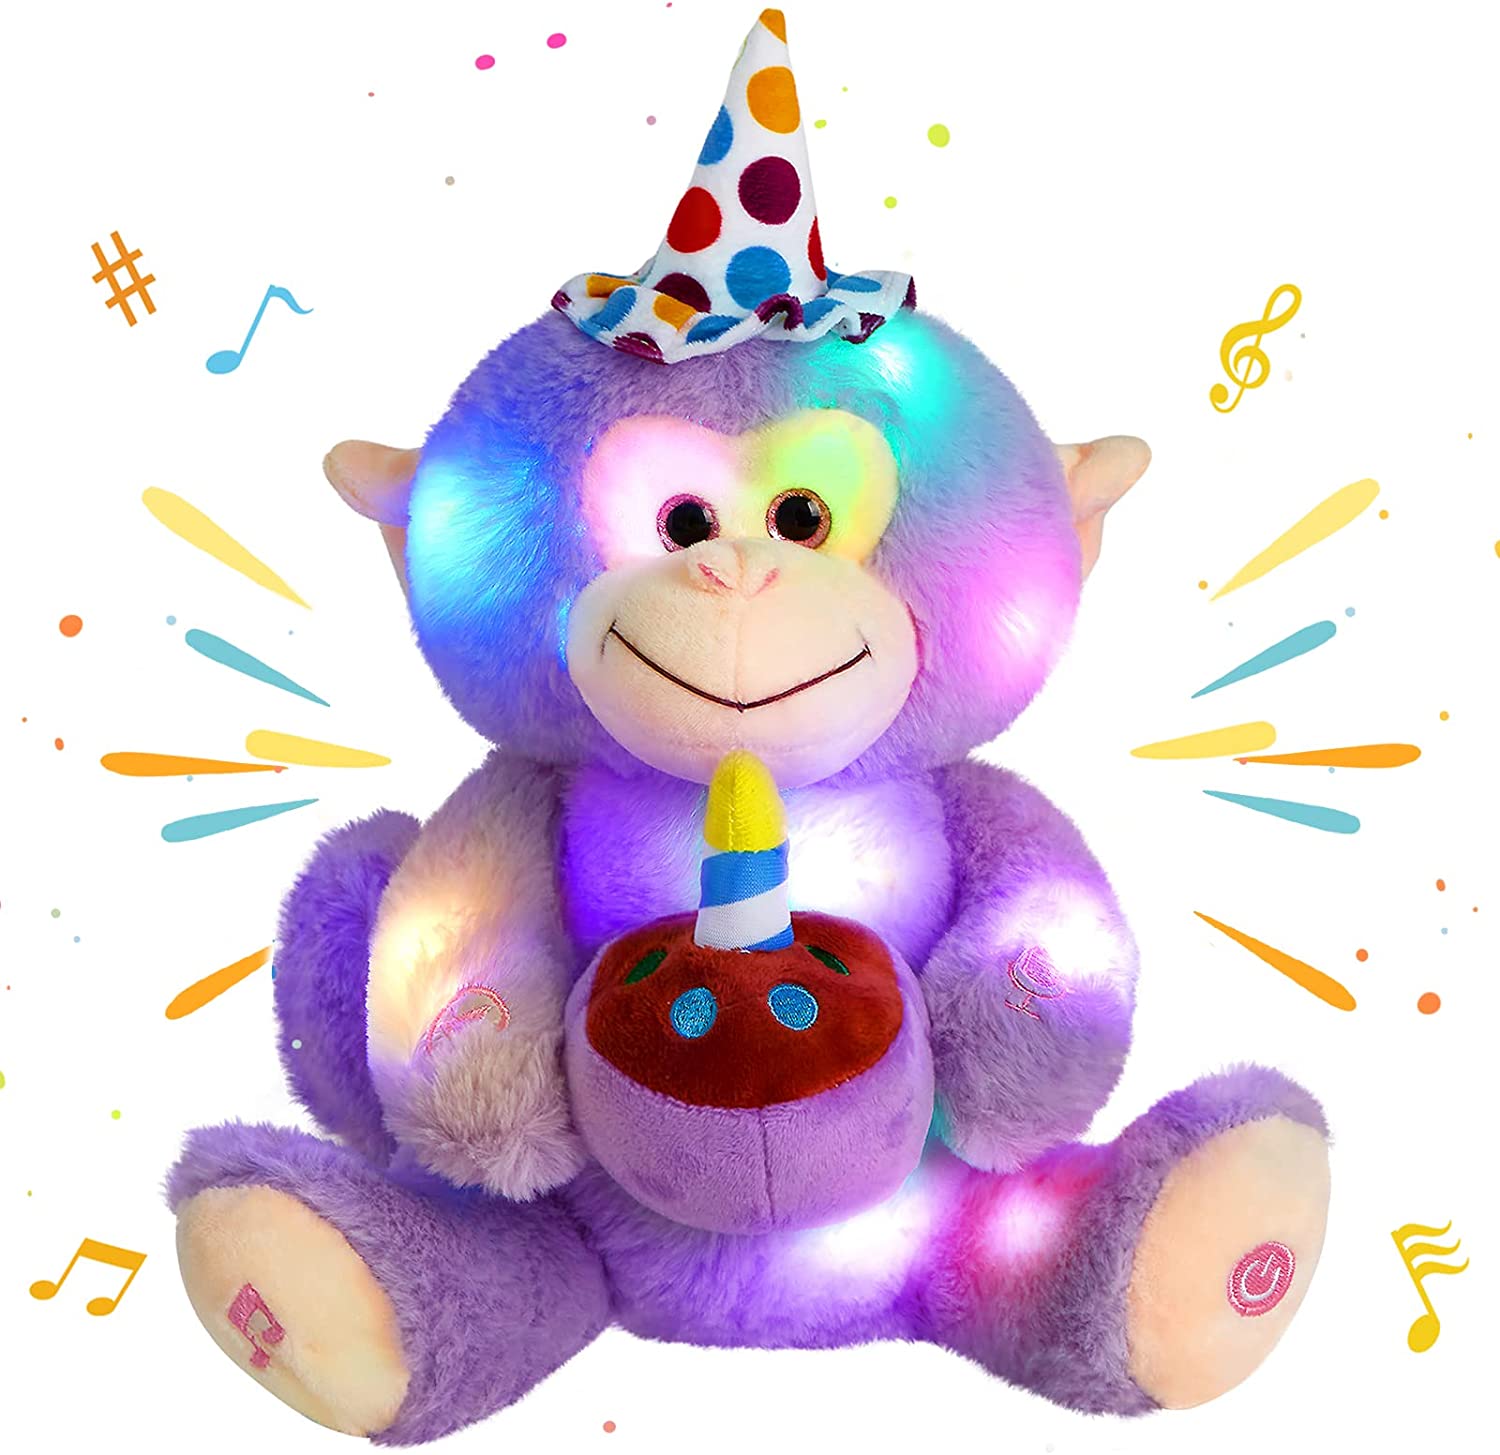 Glow Guards 12" Happy Birthday LED Monkey Stuffed Animal Electric Recordable Glowing Musical Doll Singing Soft Plush Toy for Kids, Purple